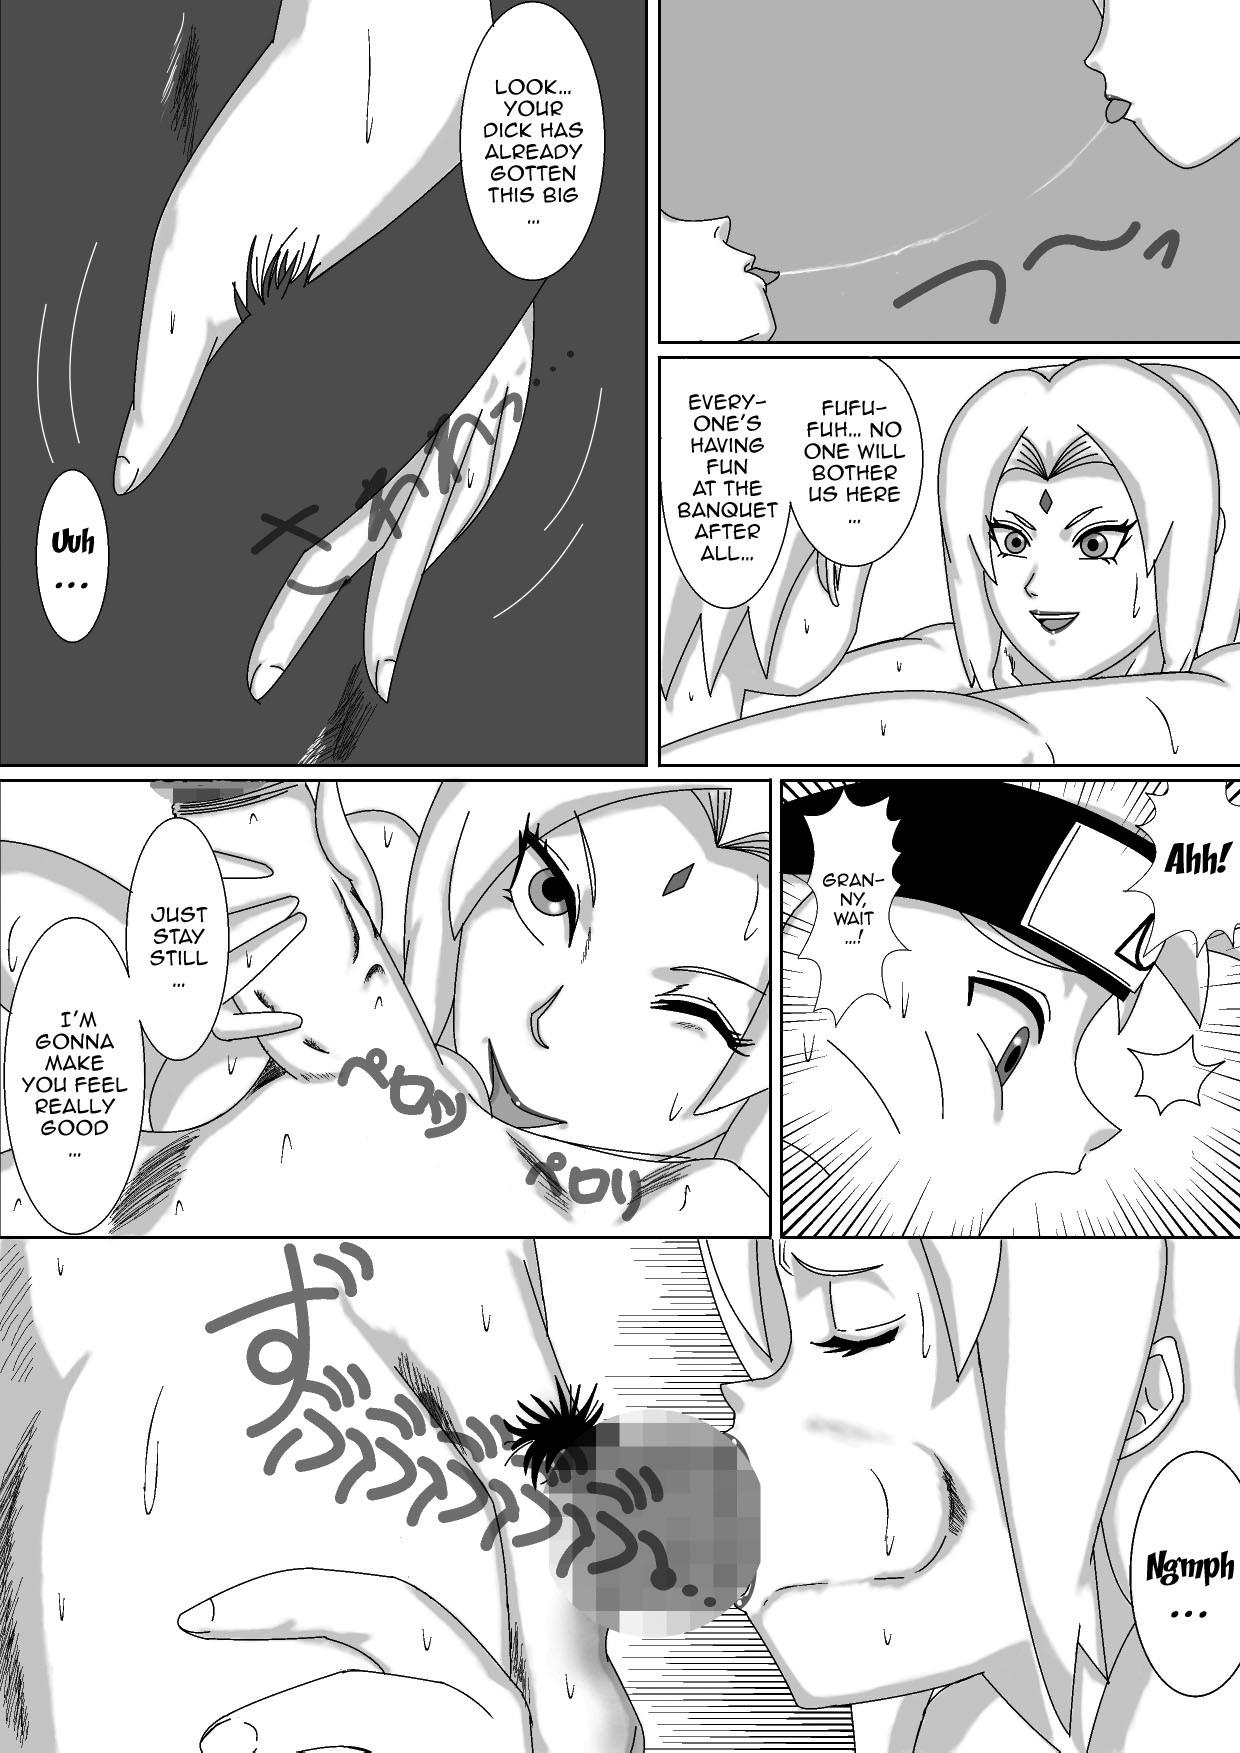 Rough Porn Nomisugite Deisui Shita BBA to Yarimakutta Ken!! | The Case Of Having Sex With This Old Lady After She Got Herself Really Drunk - Naruto Pasivo - Page 7